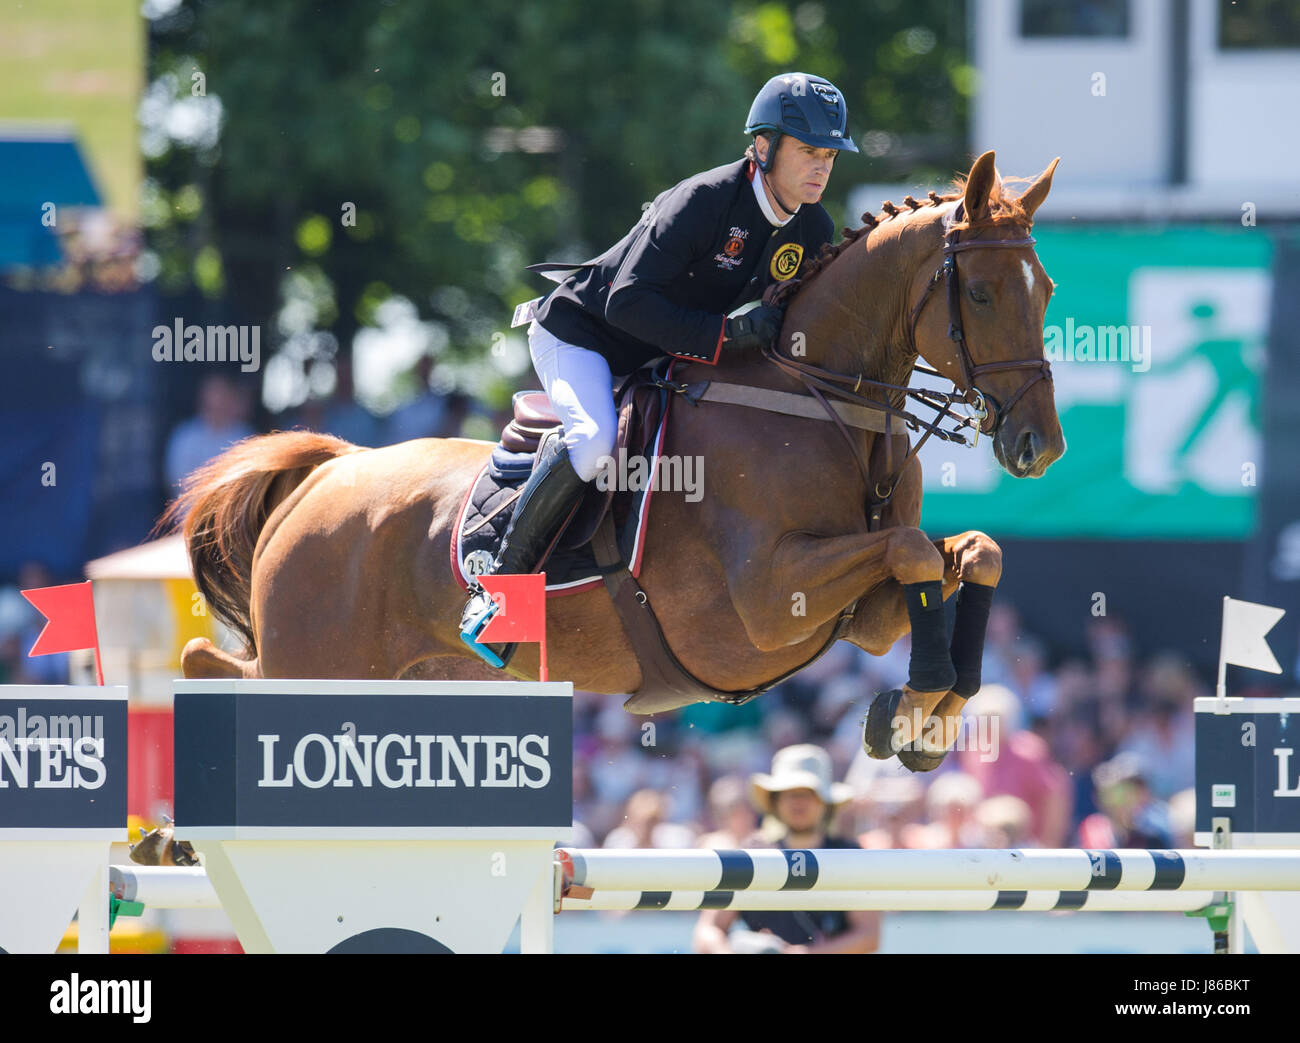 Klein Flottbeck, Germany. 27th May, 2017. Rider Deniy Lynch from Ireland and his horse RMF Echo jump over an obstacle during the Global Champions League in Hamburg in Klein Flottbeck, Germany, 27 May 2017. Photo: Daniel Bockwoldt/dpa/Alamy Live News Stock Photo